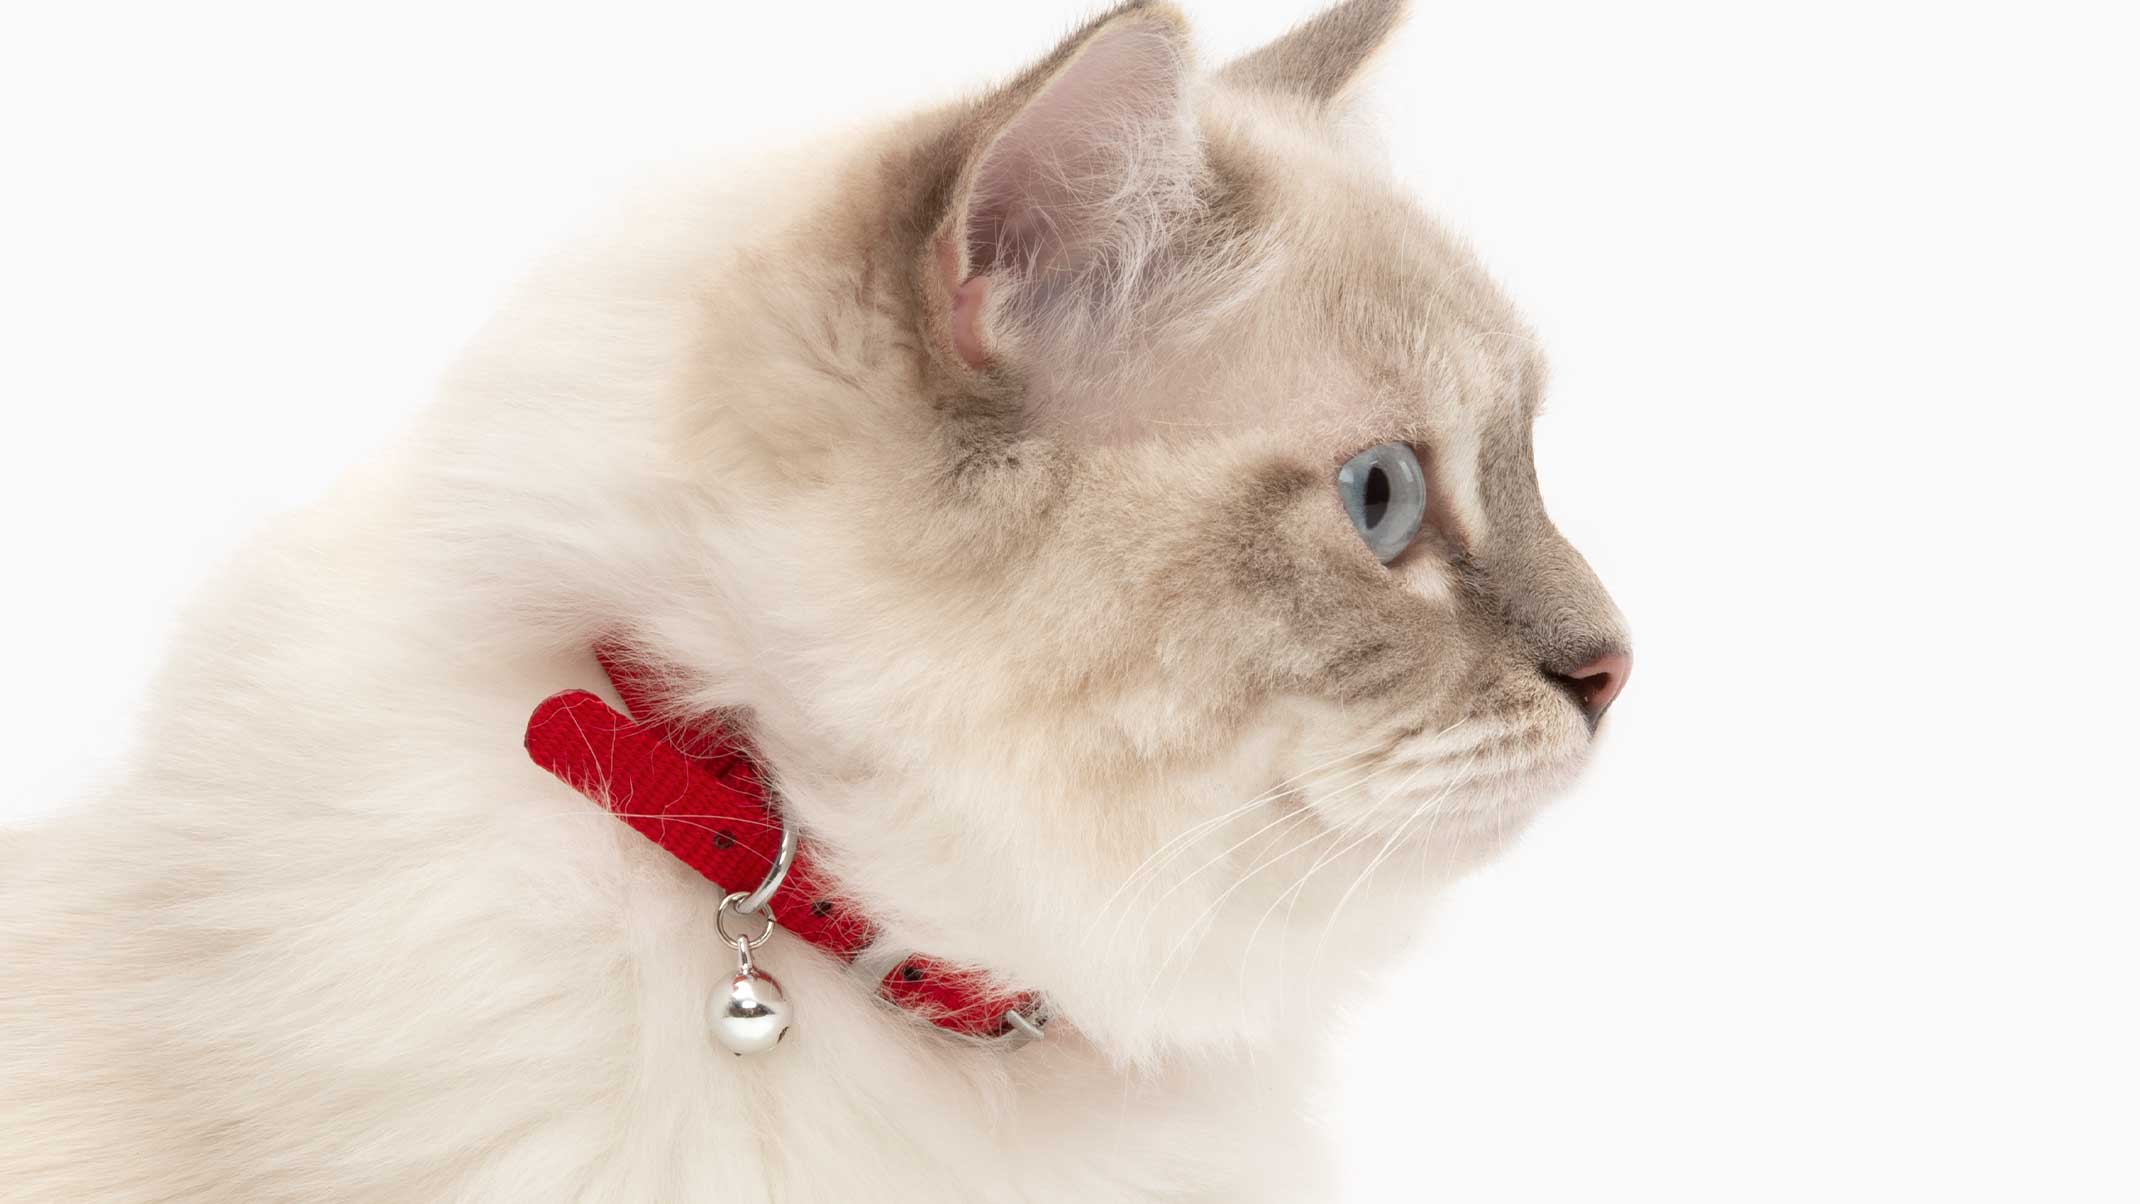 Getting the right collar for your cat